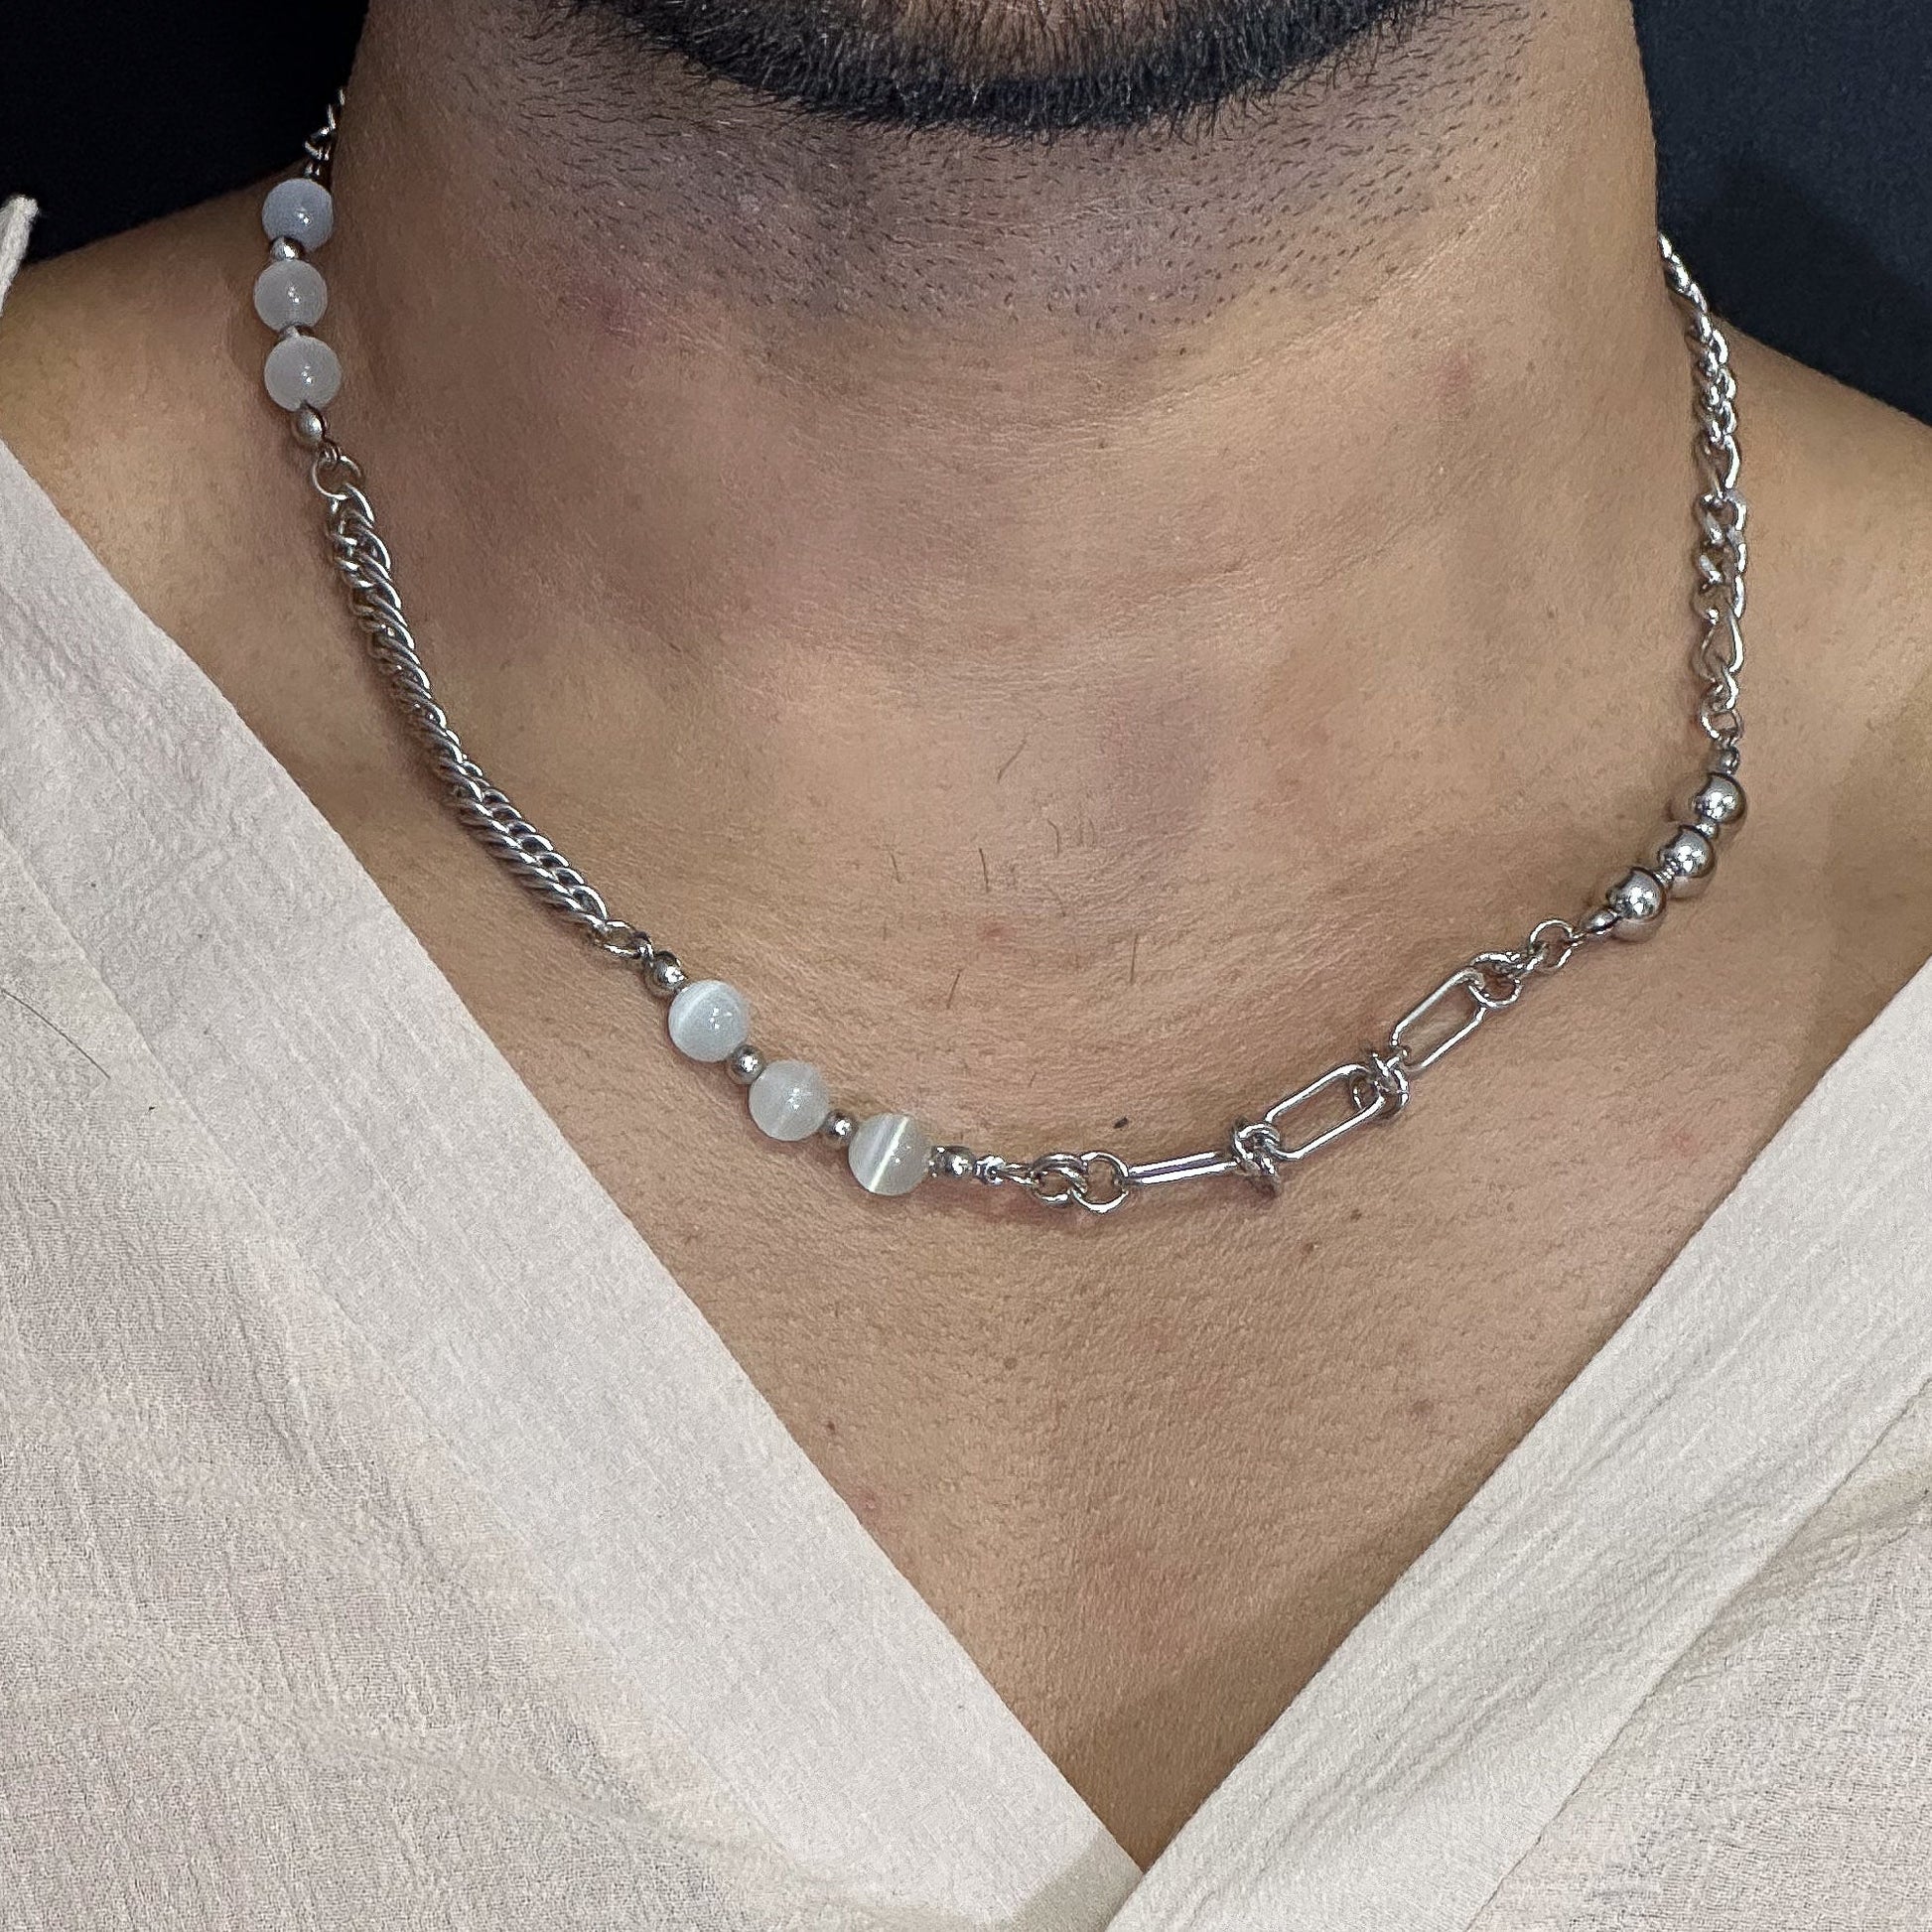 Pearlized Amalgamation - Stylish Trigon Pearl Necklaces Fusioned With Steel Chain For Men And Boys